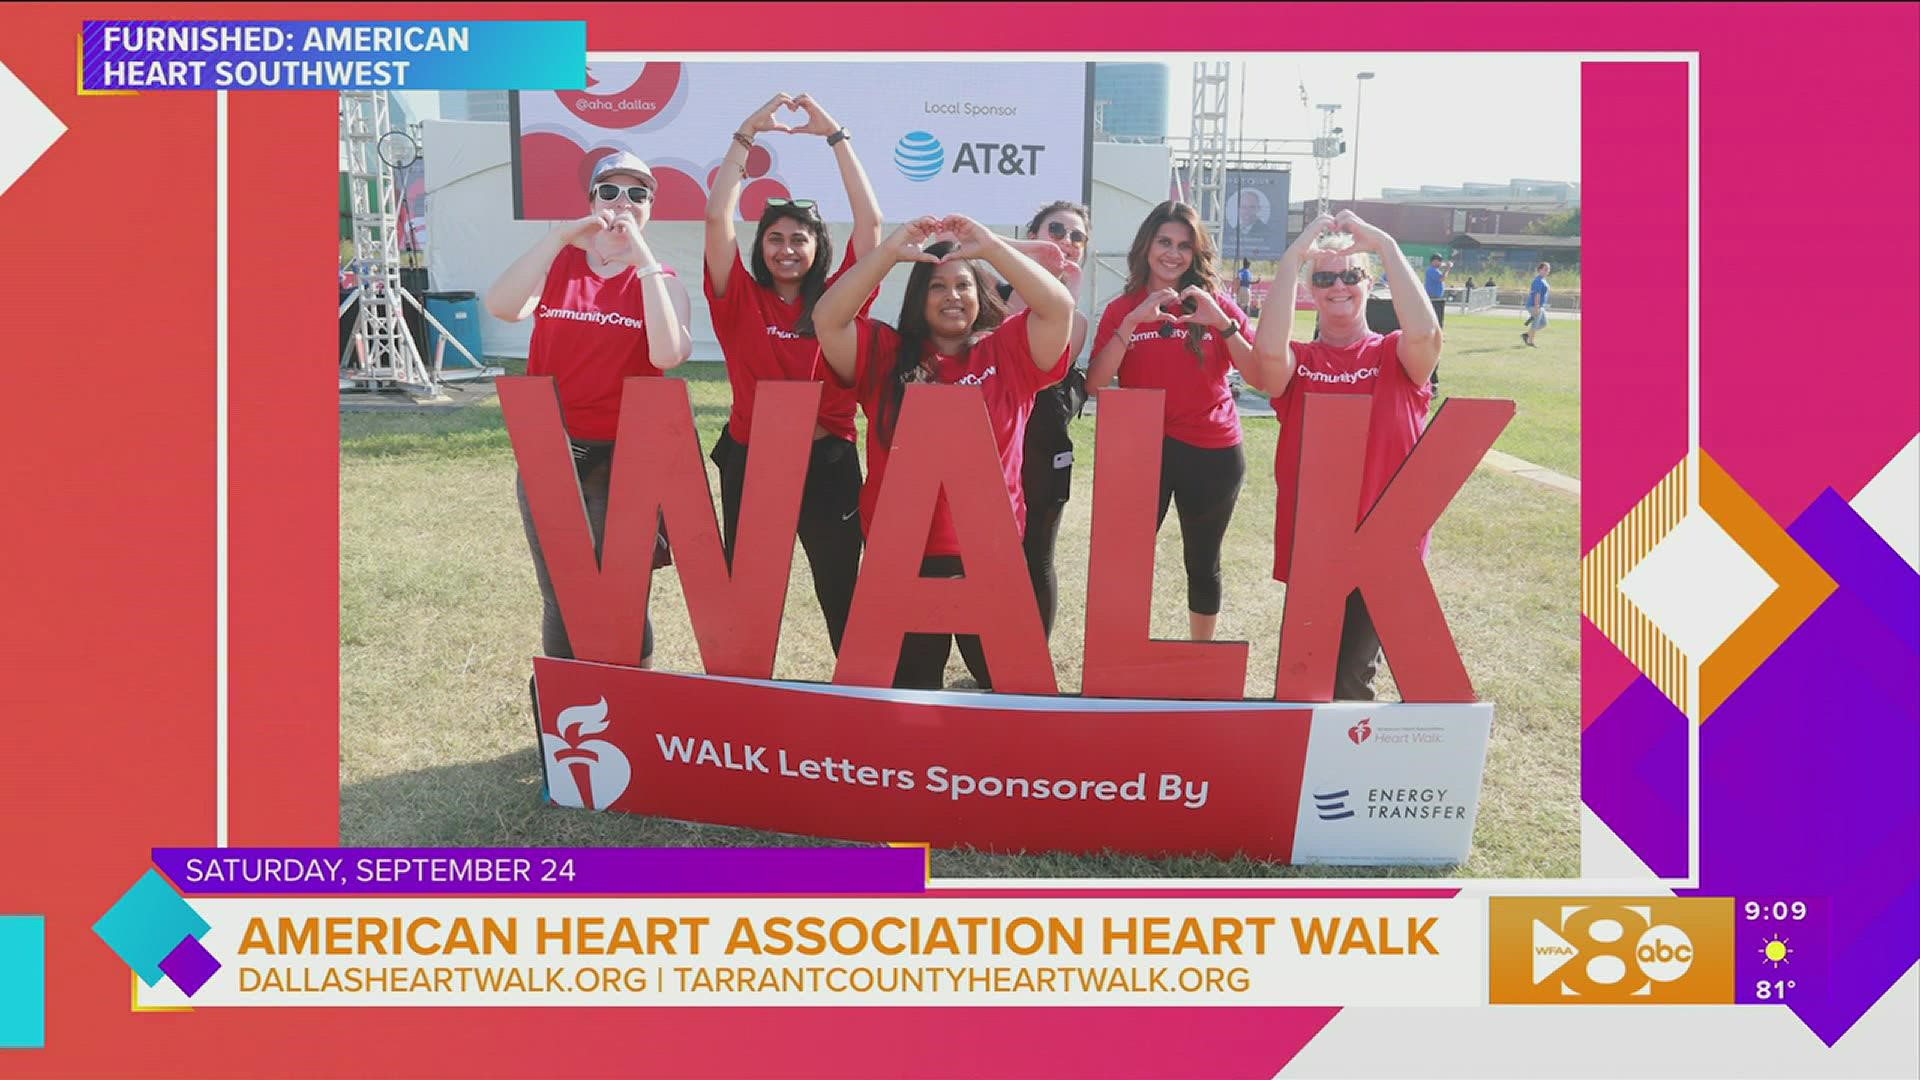 Time to grab your sneakers, the American Heart Association wants to get your hearts pumping to help raise funds for better heart health.